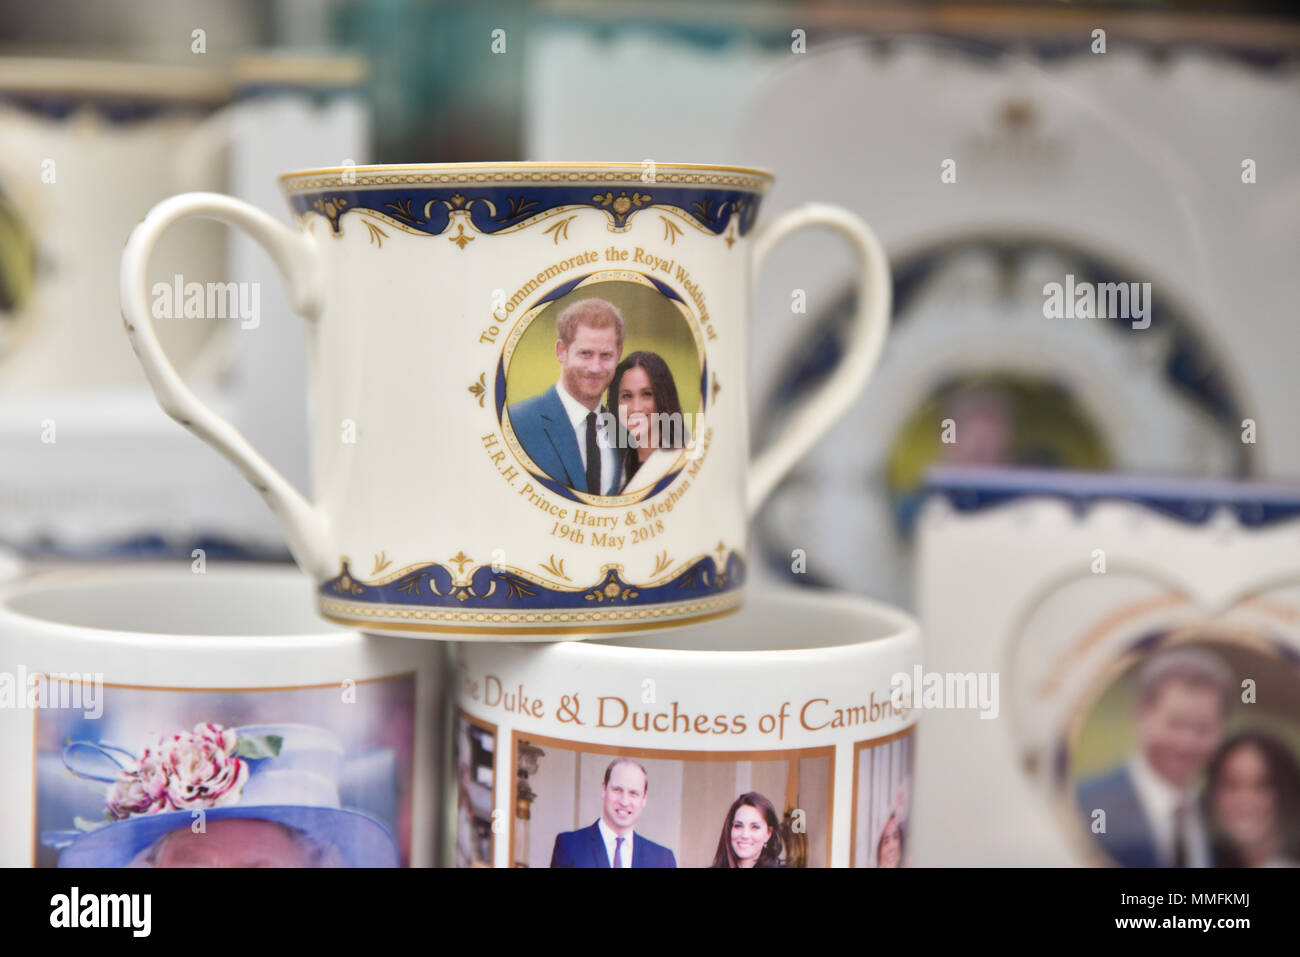 London, UK. 11th May 2018. Gift shops in London selling Royal Wedding merchandise for the wedding of Meghan Markle and Prince Harry. Credit: Matthew Chattle/Alamy Live News Stock Photo